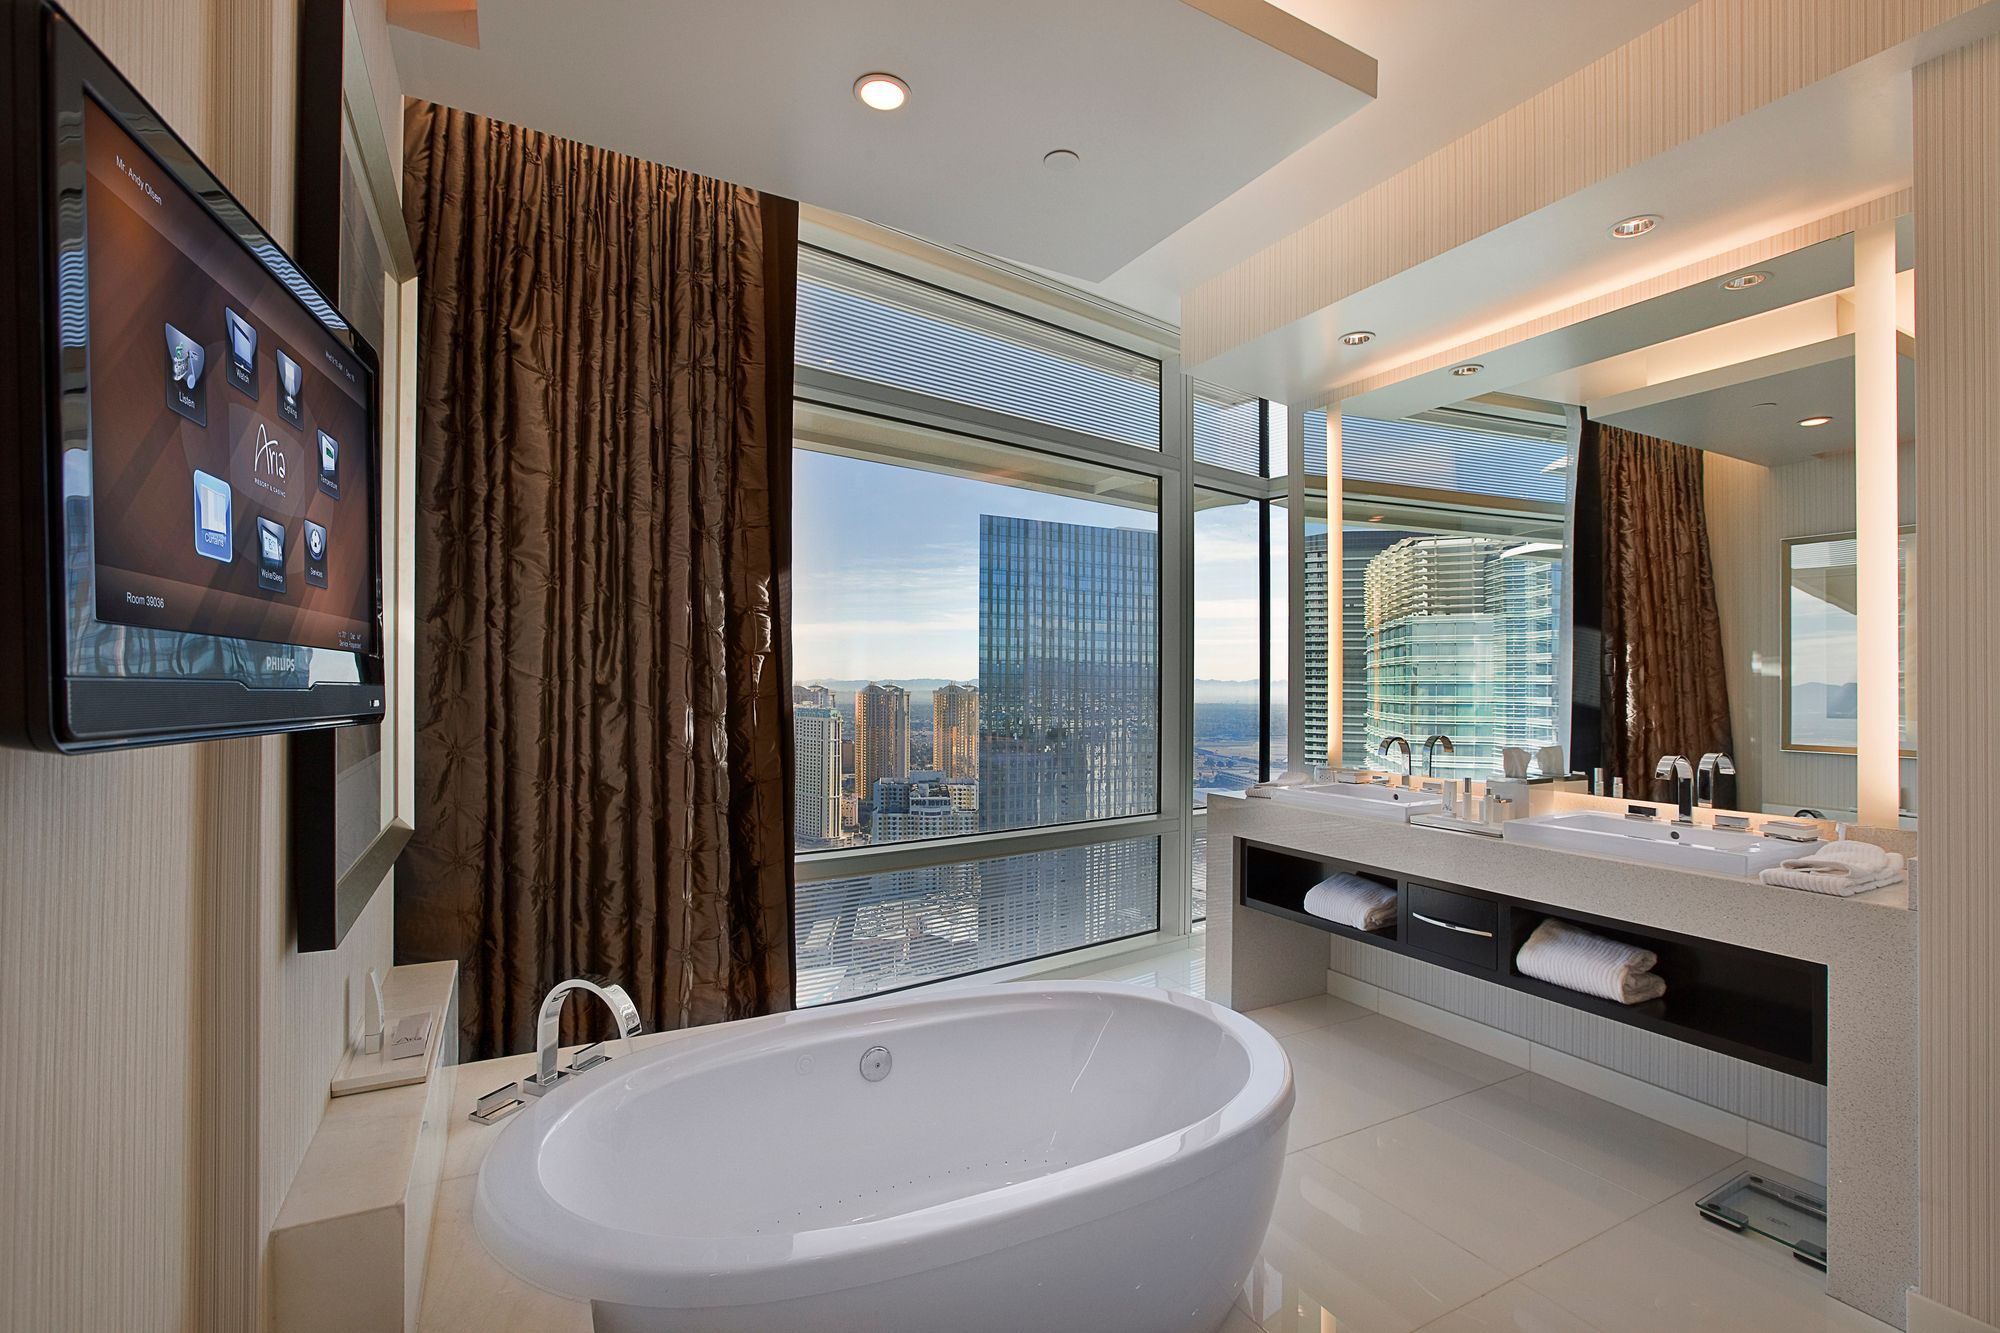 Bathroom with motorized window treatments and lighted mirrors